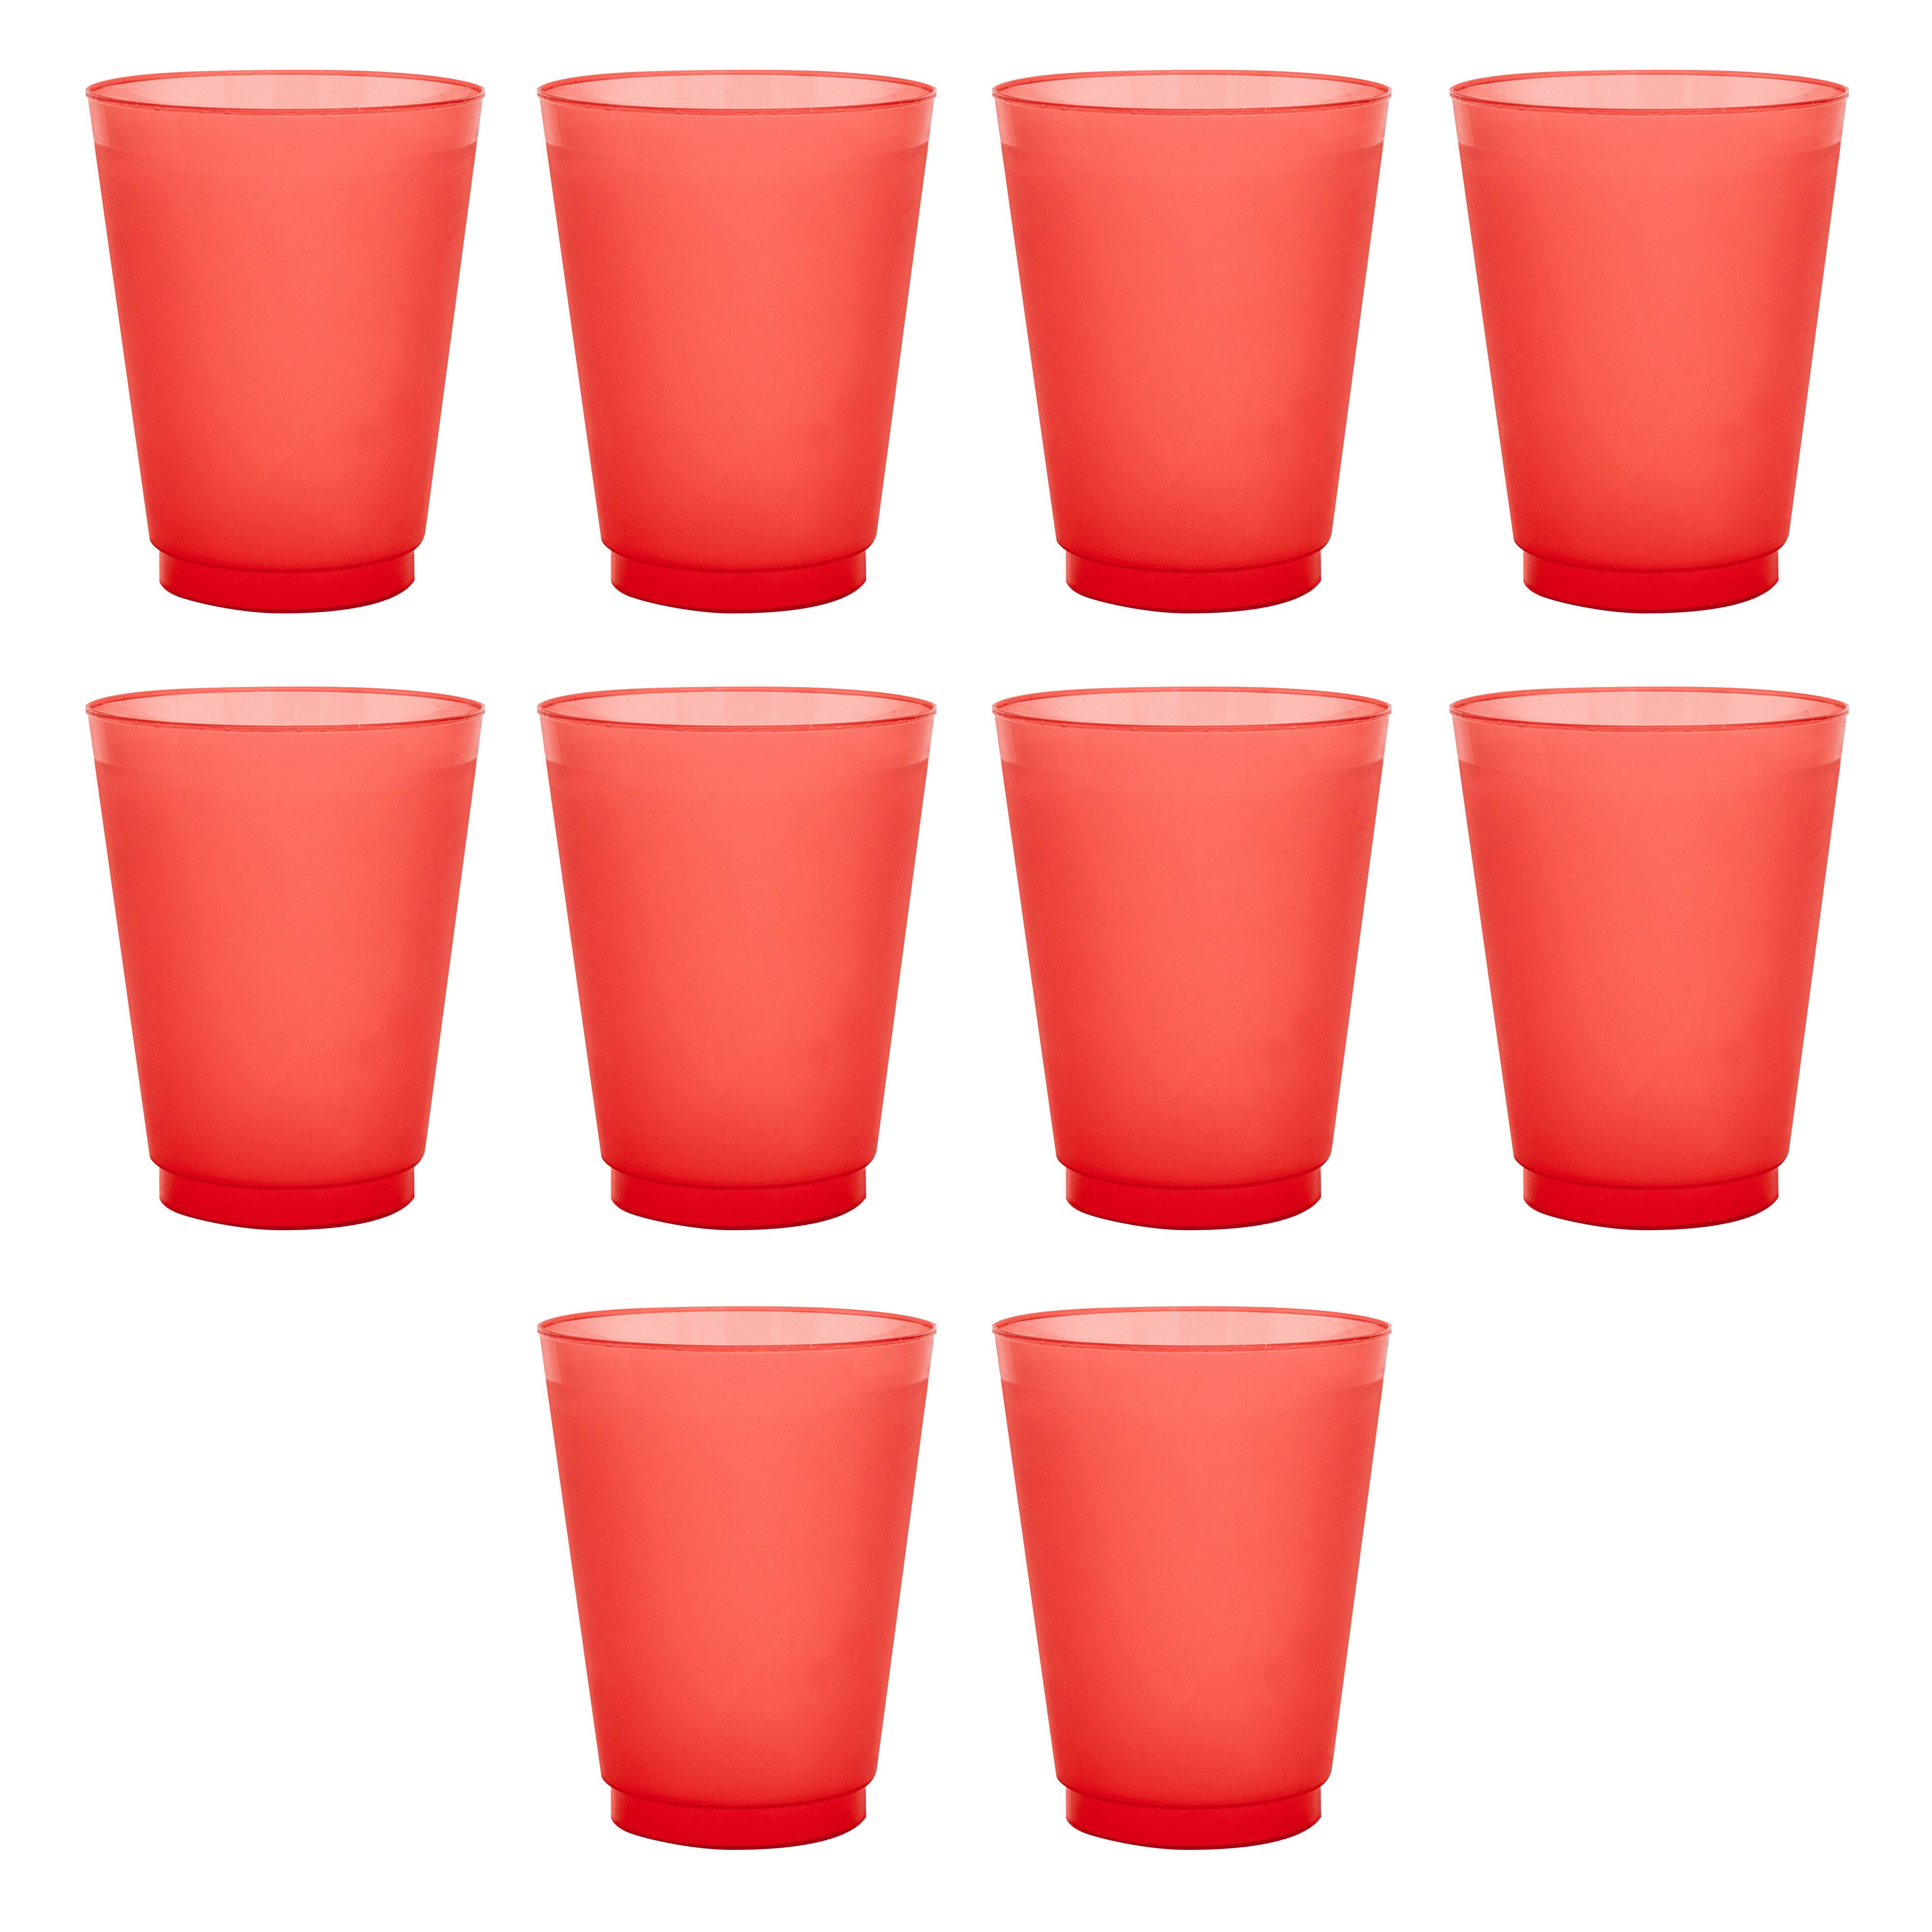 Classic Red 16 oz plastic cup